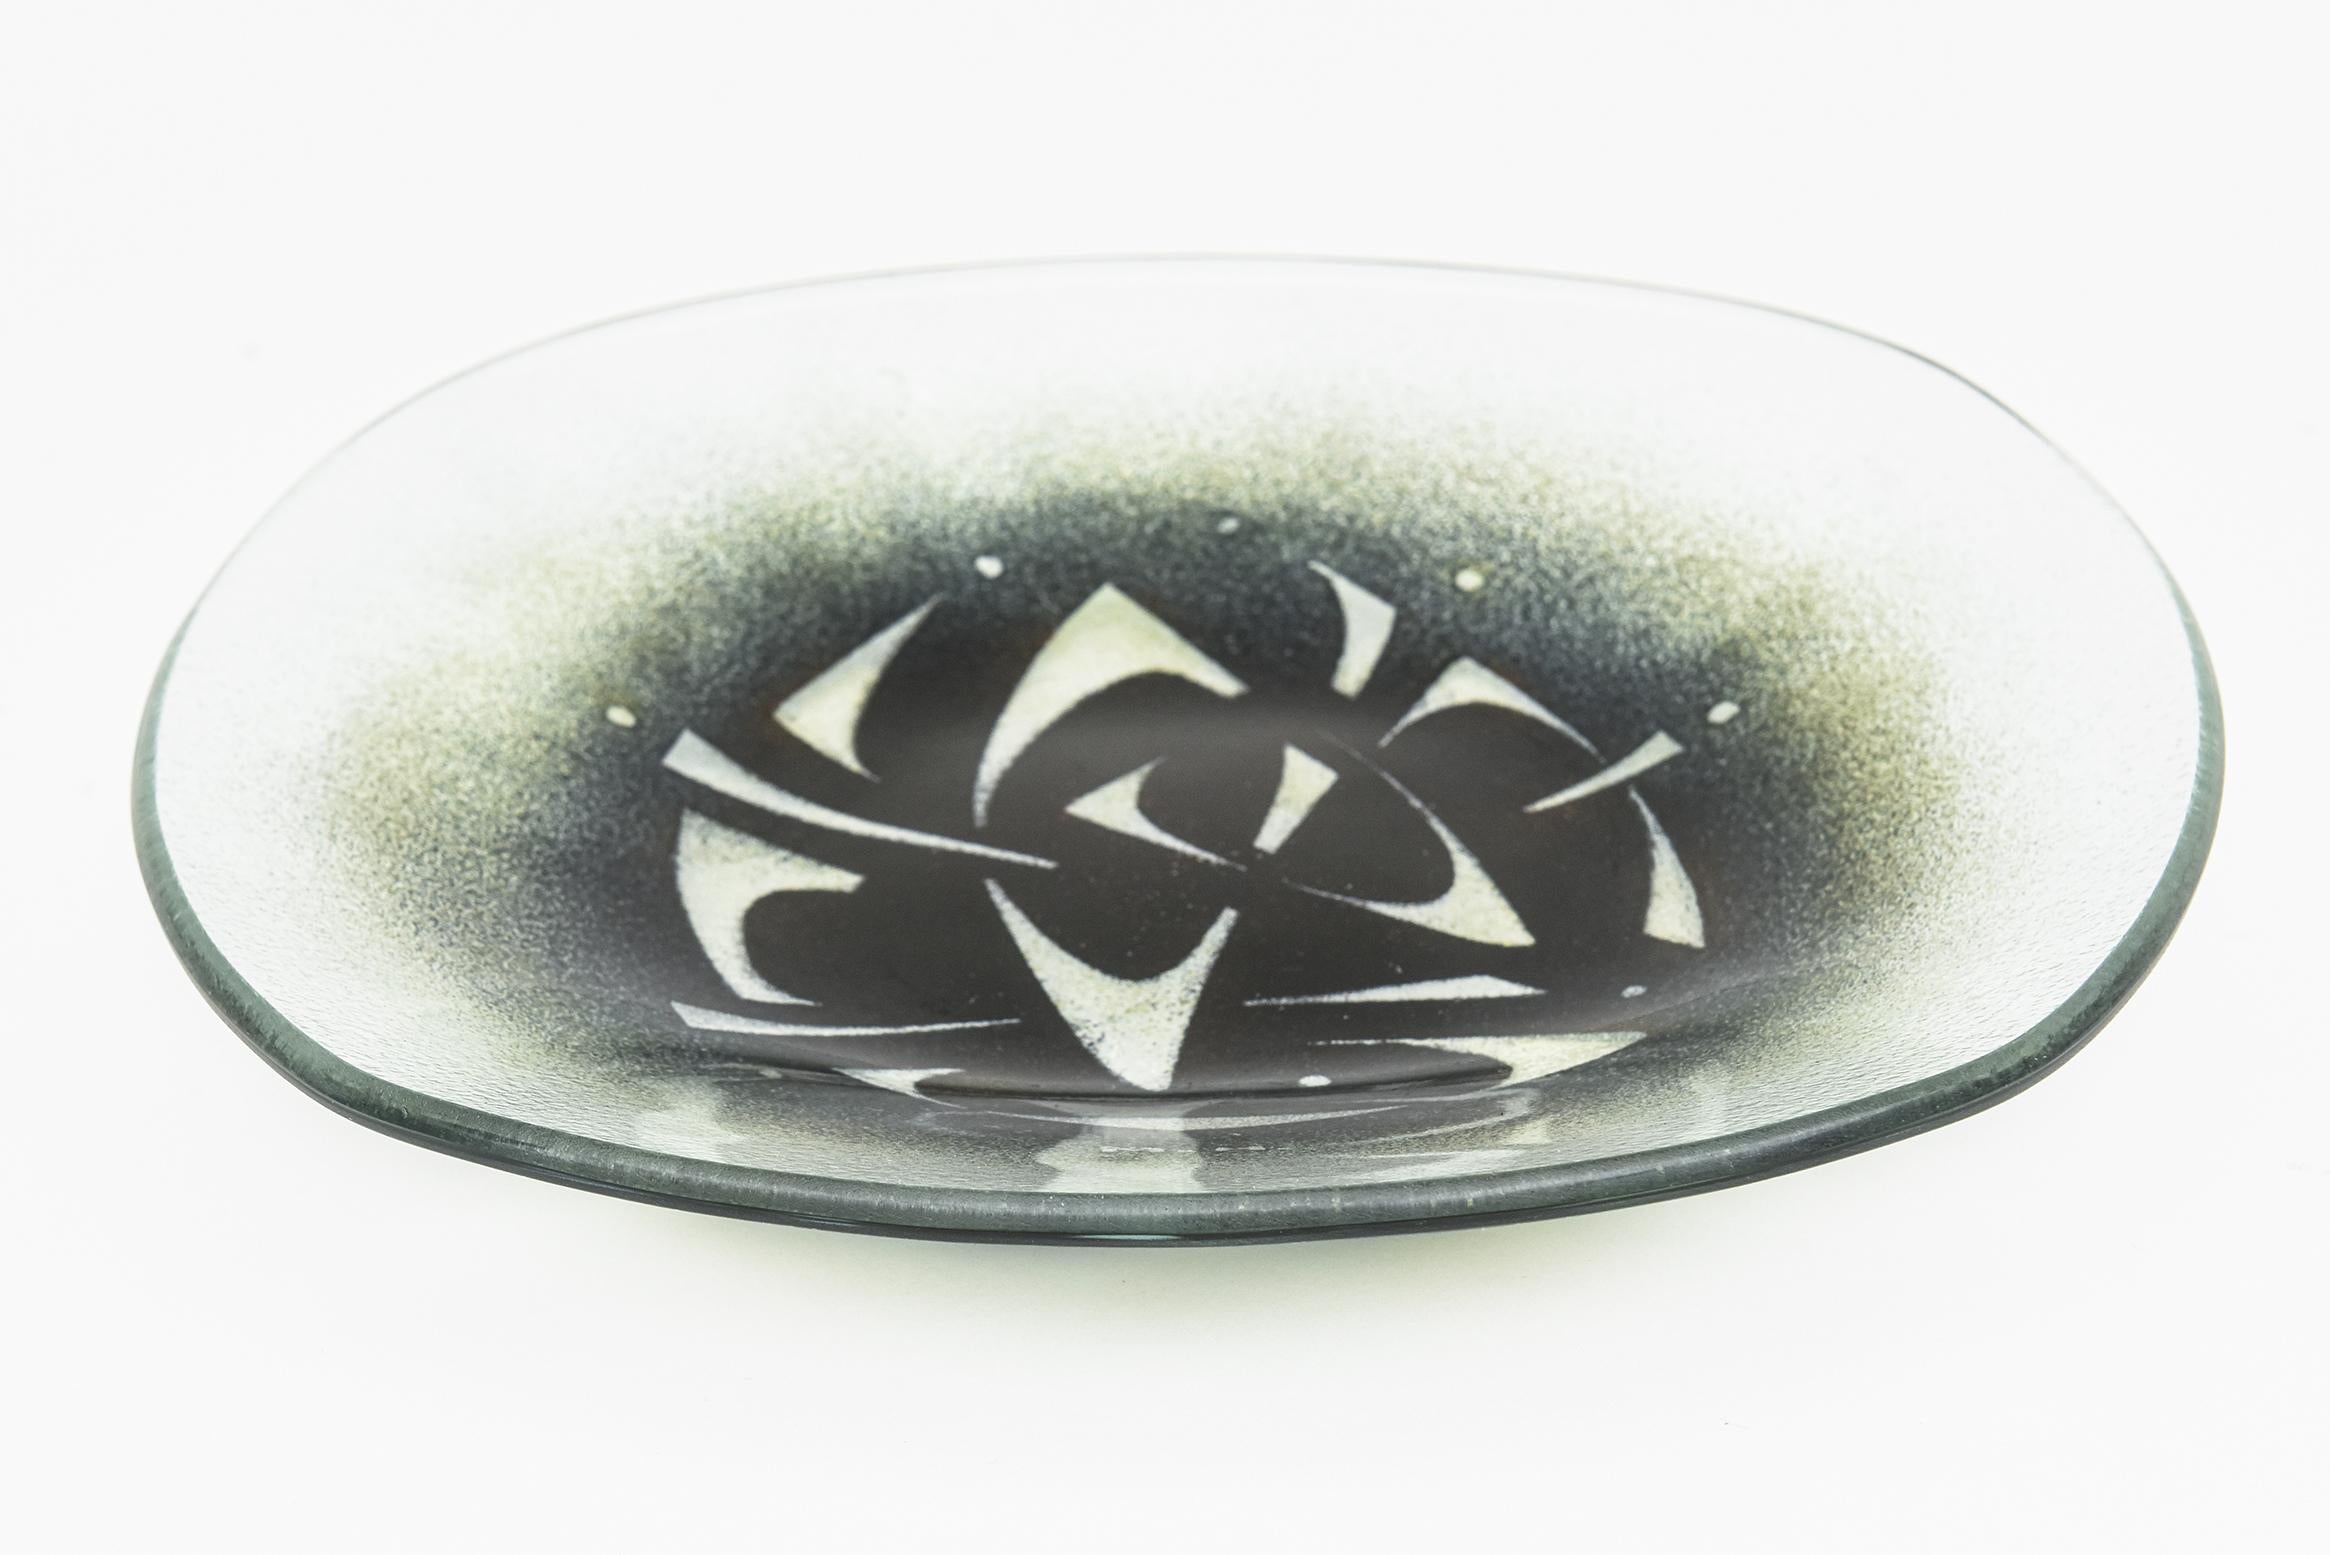 This most unusual signed glass bowl or plate by Maurice Heaton is vintage and from the 60's. The pattern and color of abstractions of green against black with white are a stand out.
The rest of the bowl is transparent and clear with a hint of